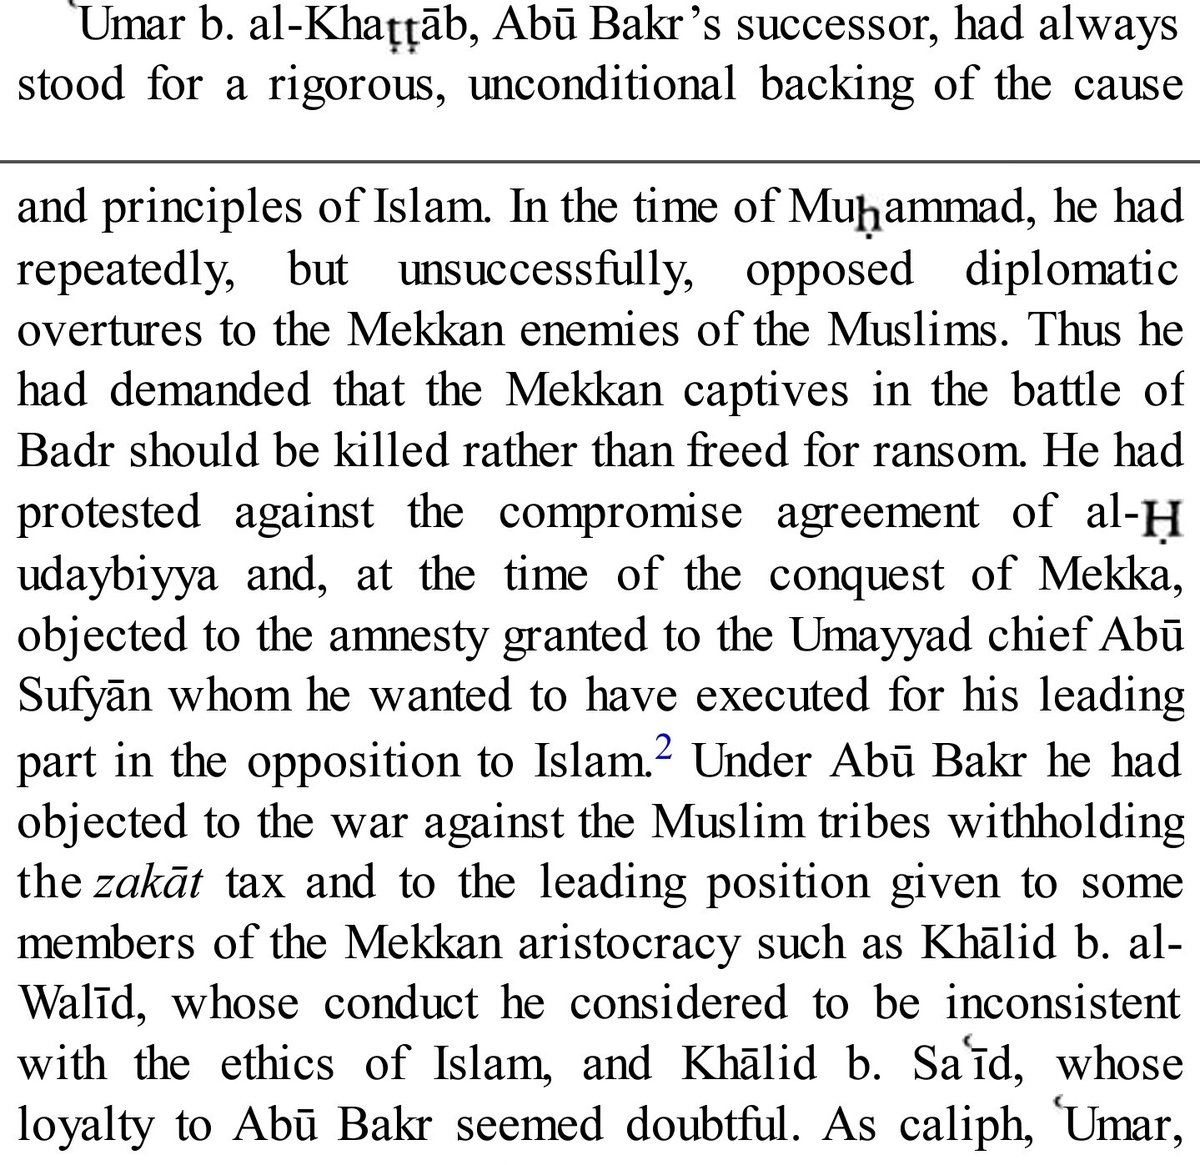 Saying he stood for a "rigorous, unconditional backing of the cause and principles of Islam" and immediately after giving examples of him resisting the Holy Prophet's actions is quite the paradox and belies the description of his zeal.He ever actually stood for his own "pride."